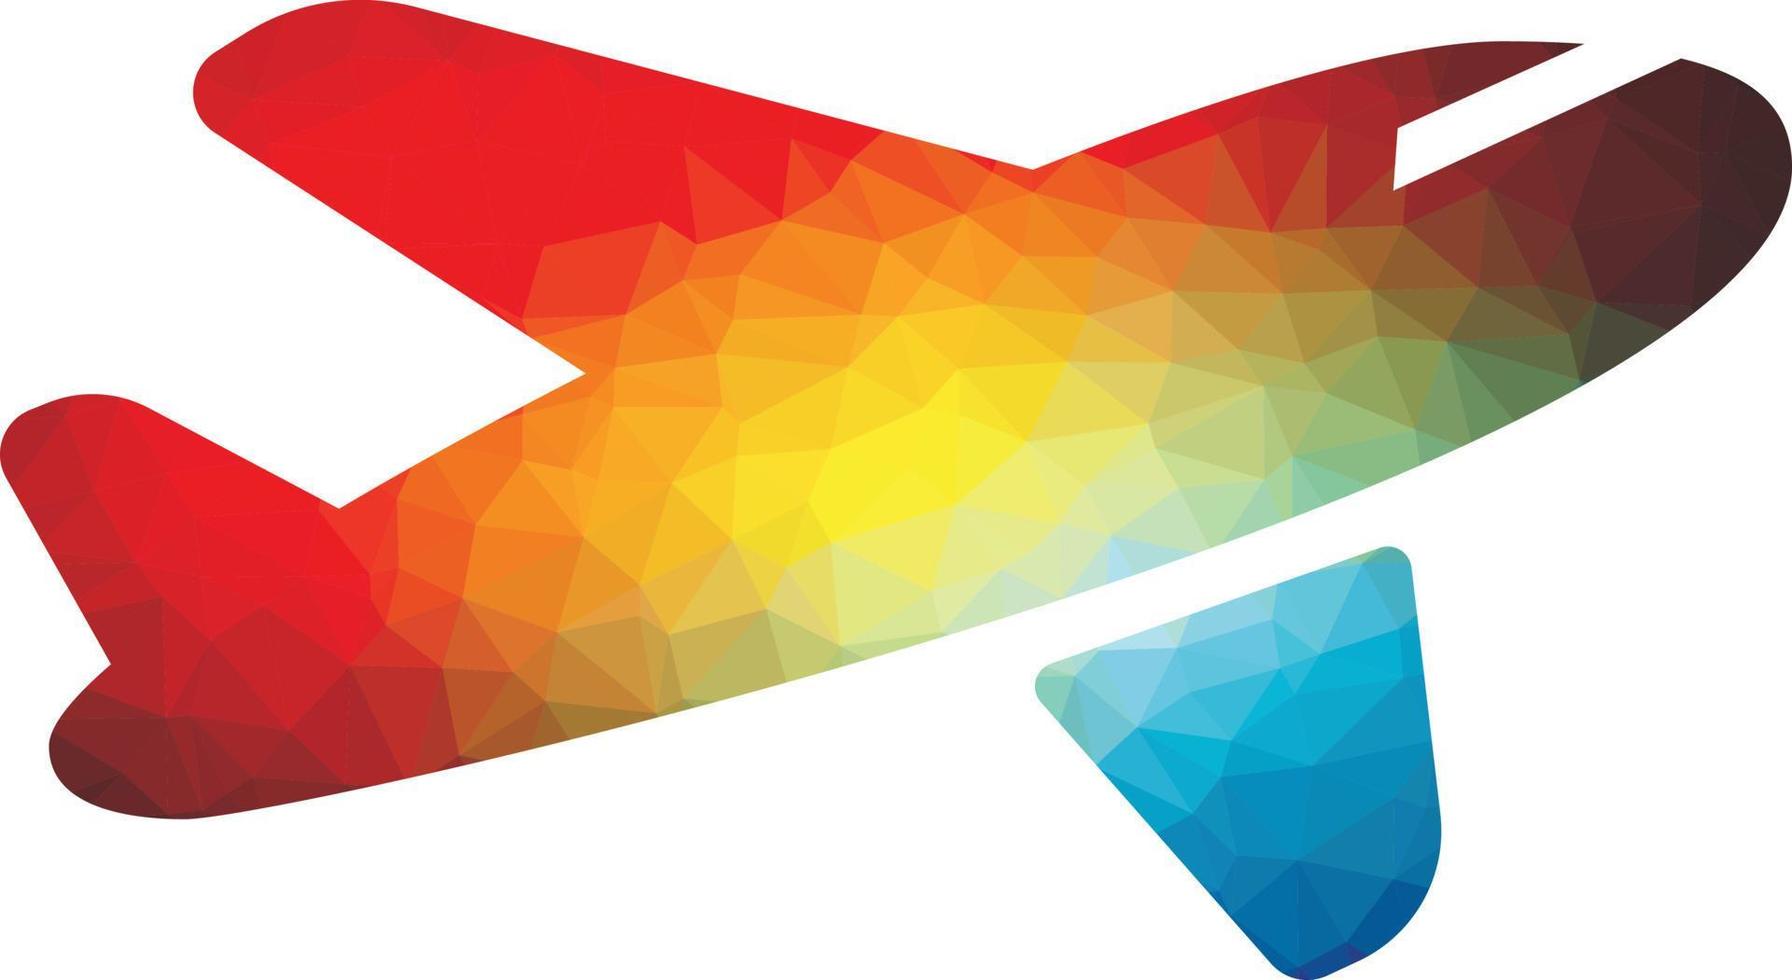 Colored Silhouette Of An Airplane In The Air vector